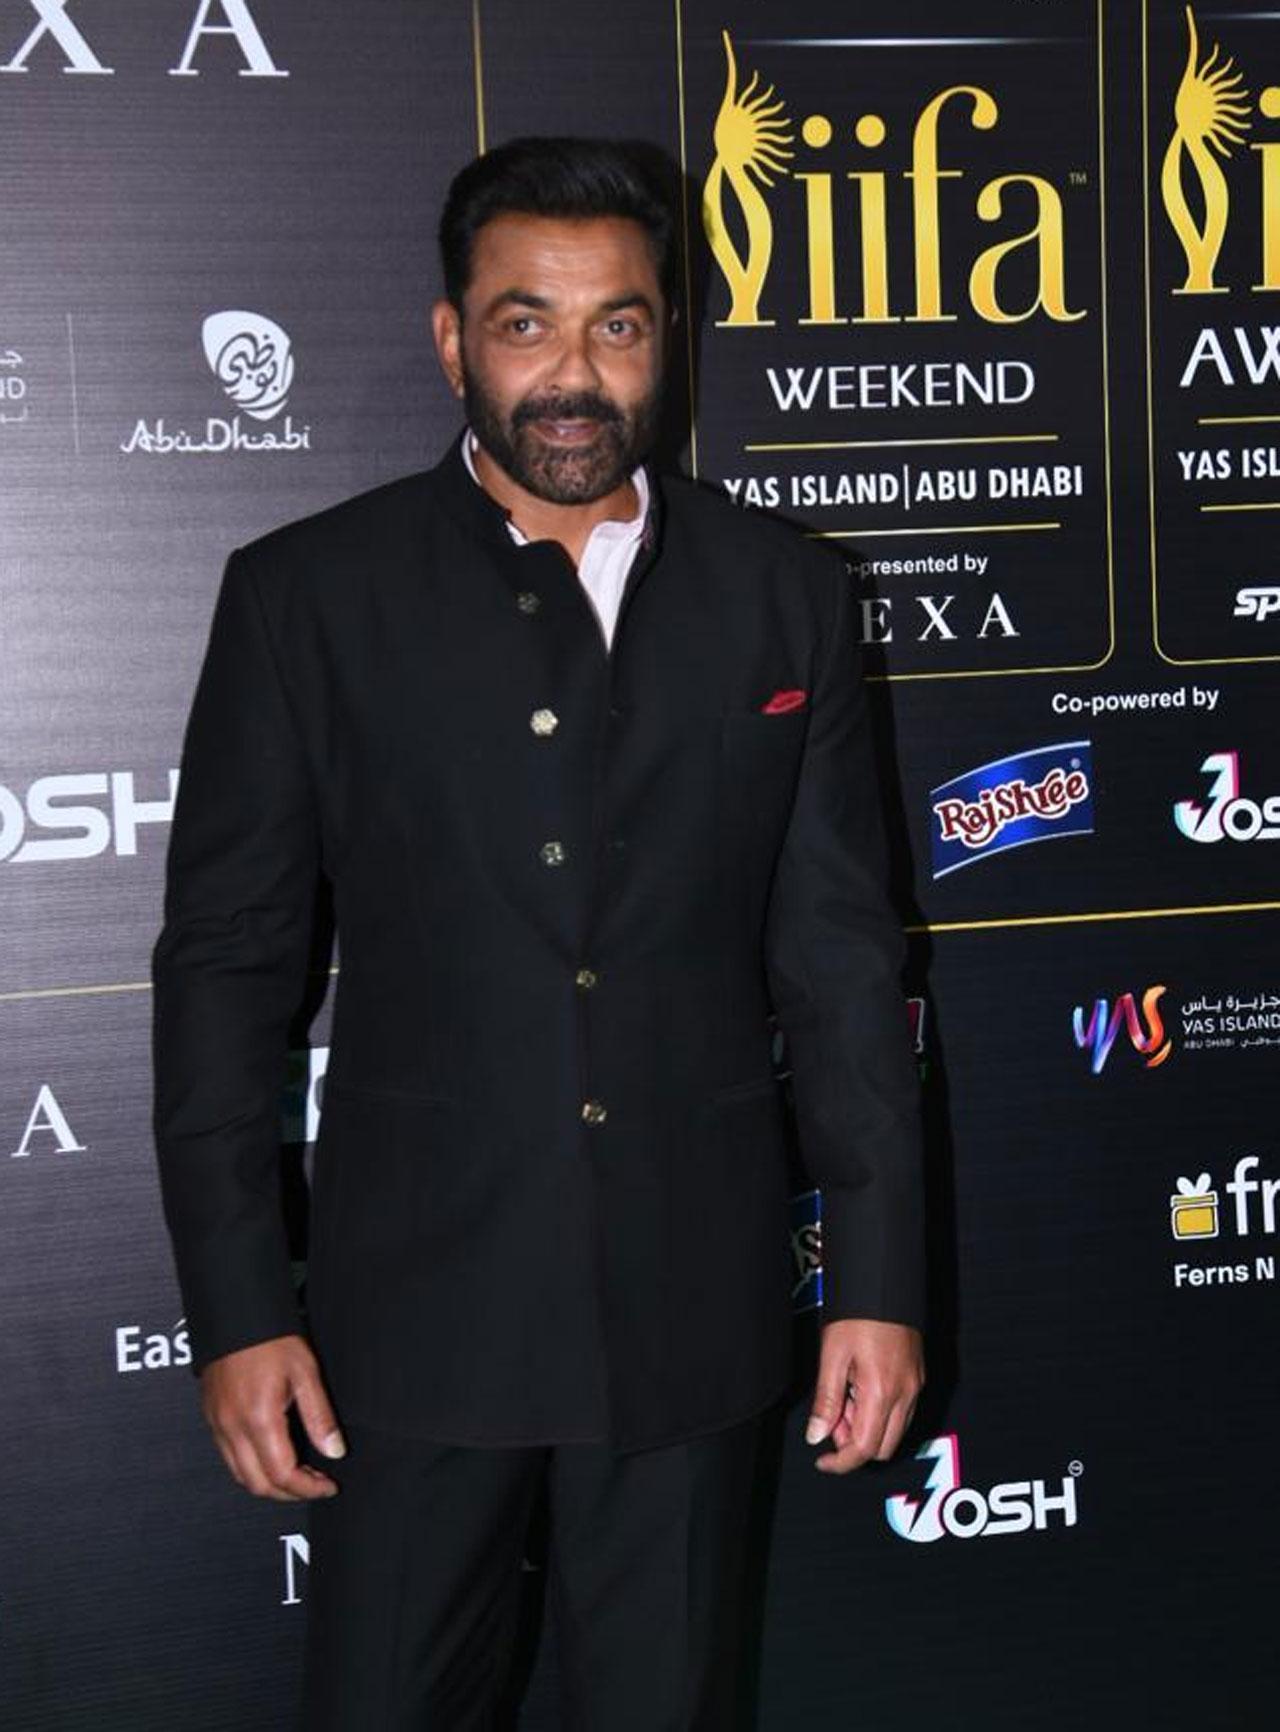 Bobby Deol is truly the man of the moment. He has had a wonderful 2022 with the releases of Love Hostel and Aashram 3. He’s now gearing up for season 4, followed by Apne 2, Animal, Pent House